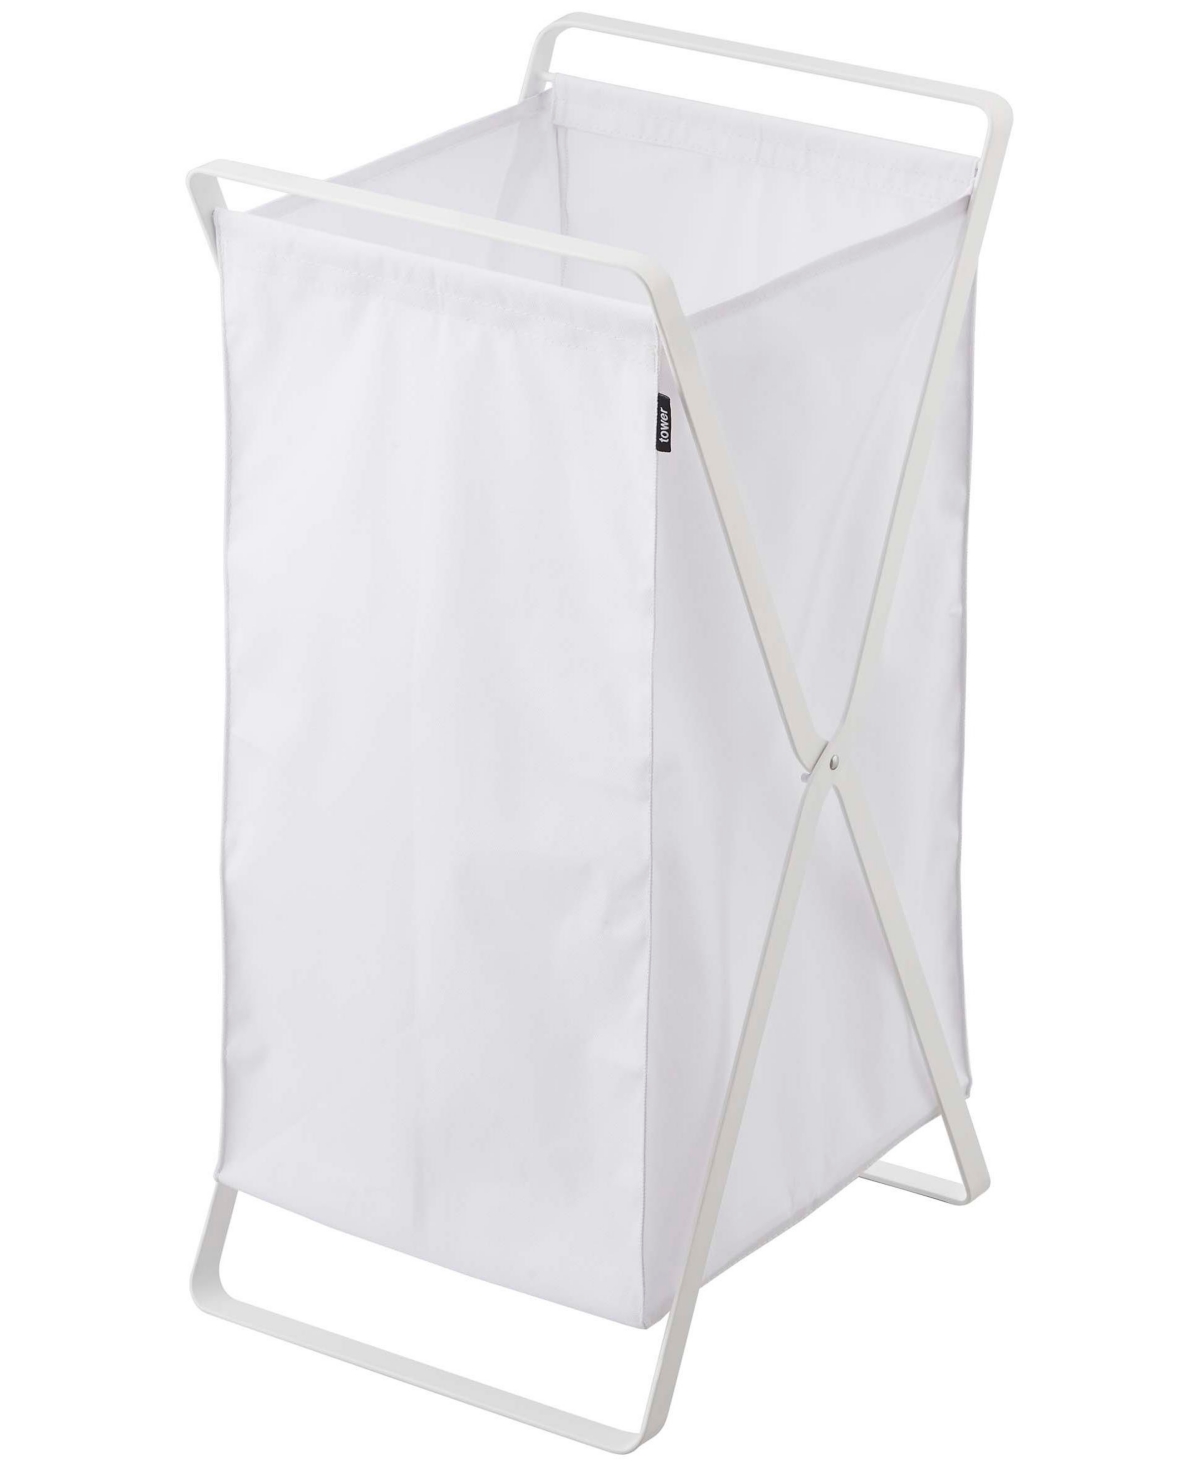 Home Tower Laundry Hamper